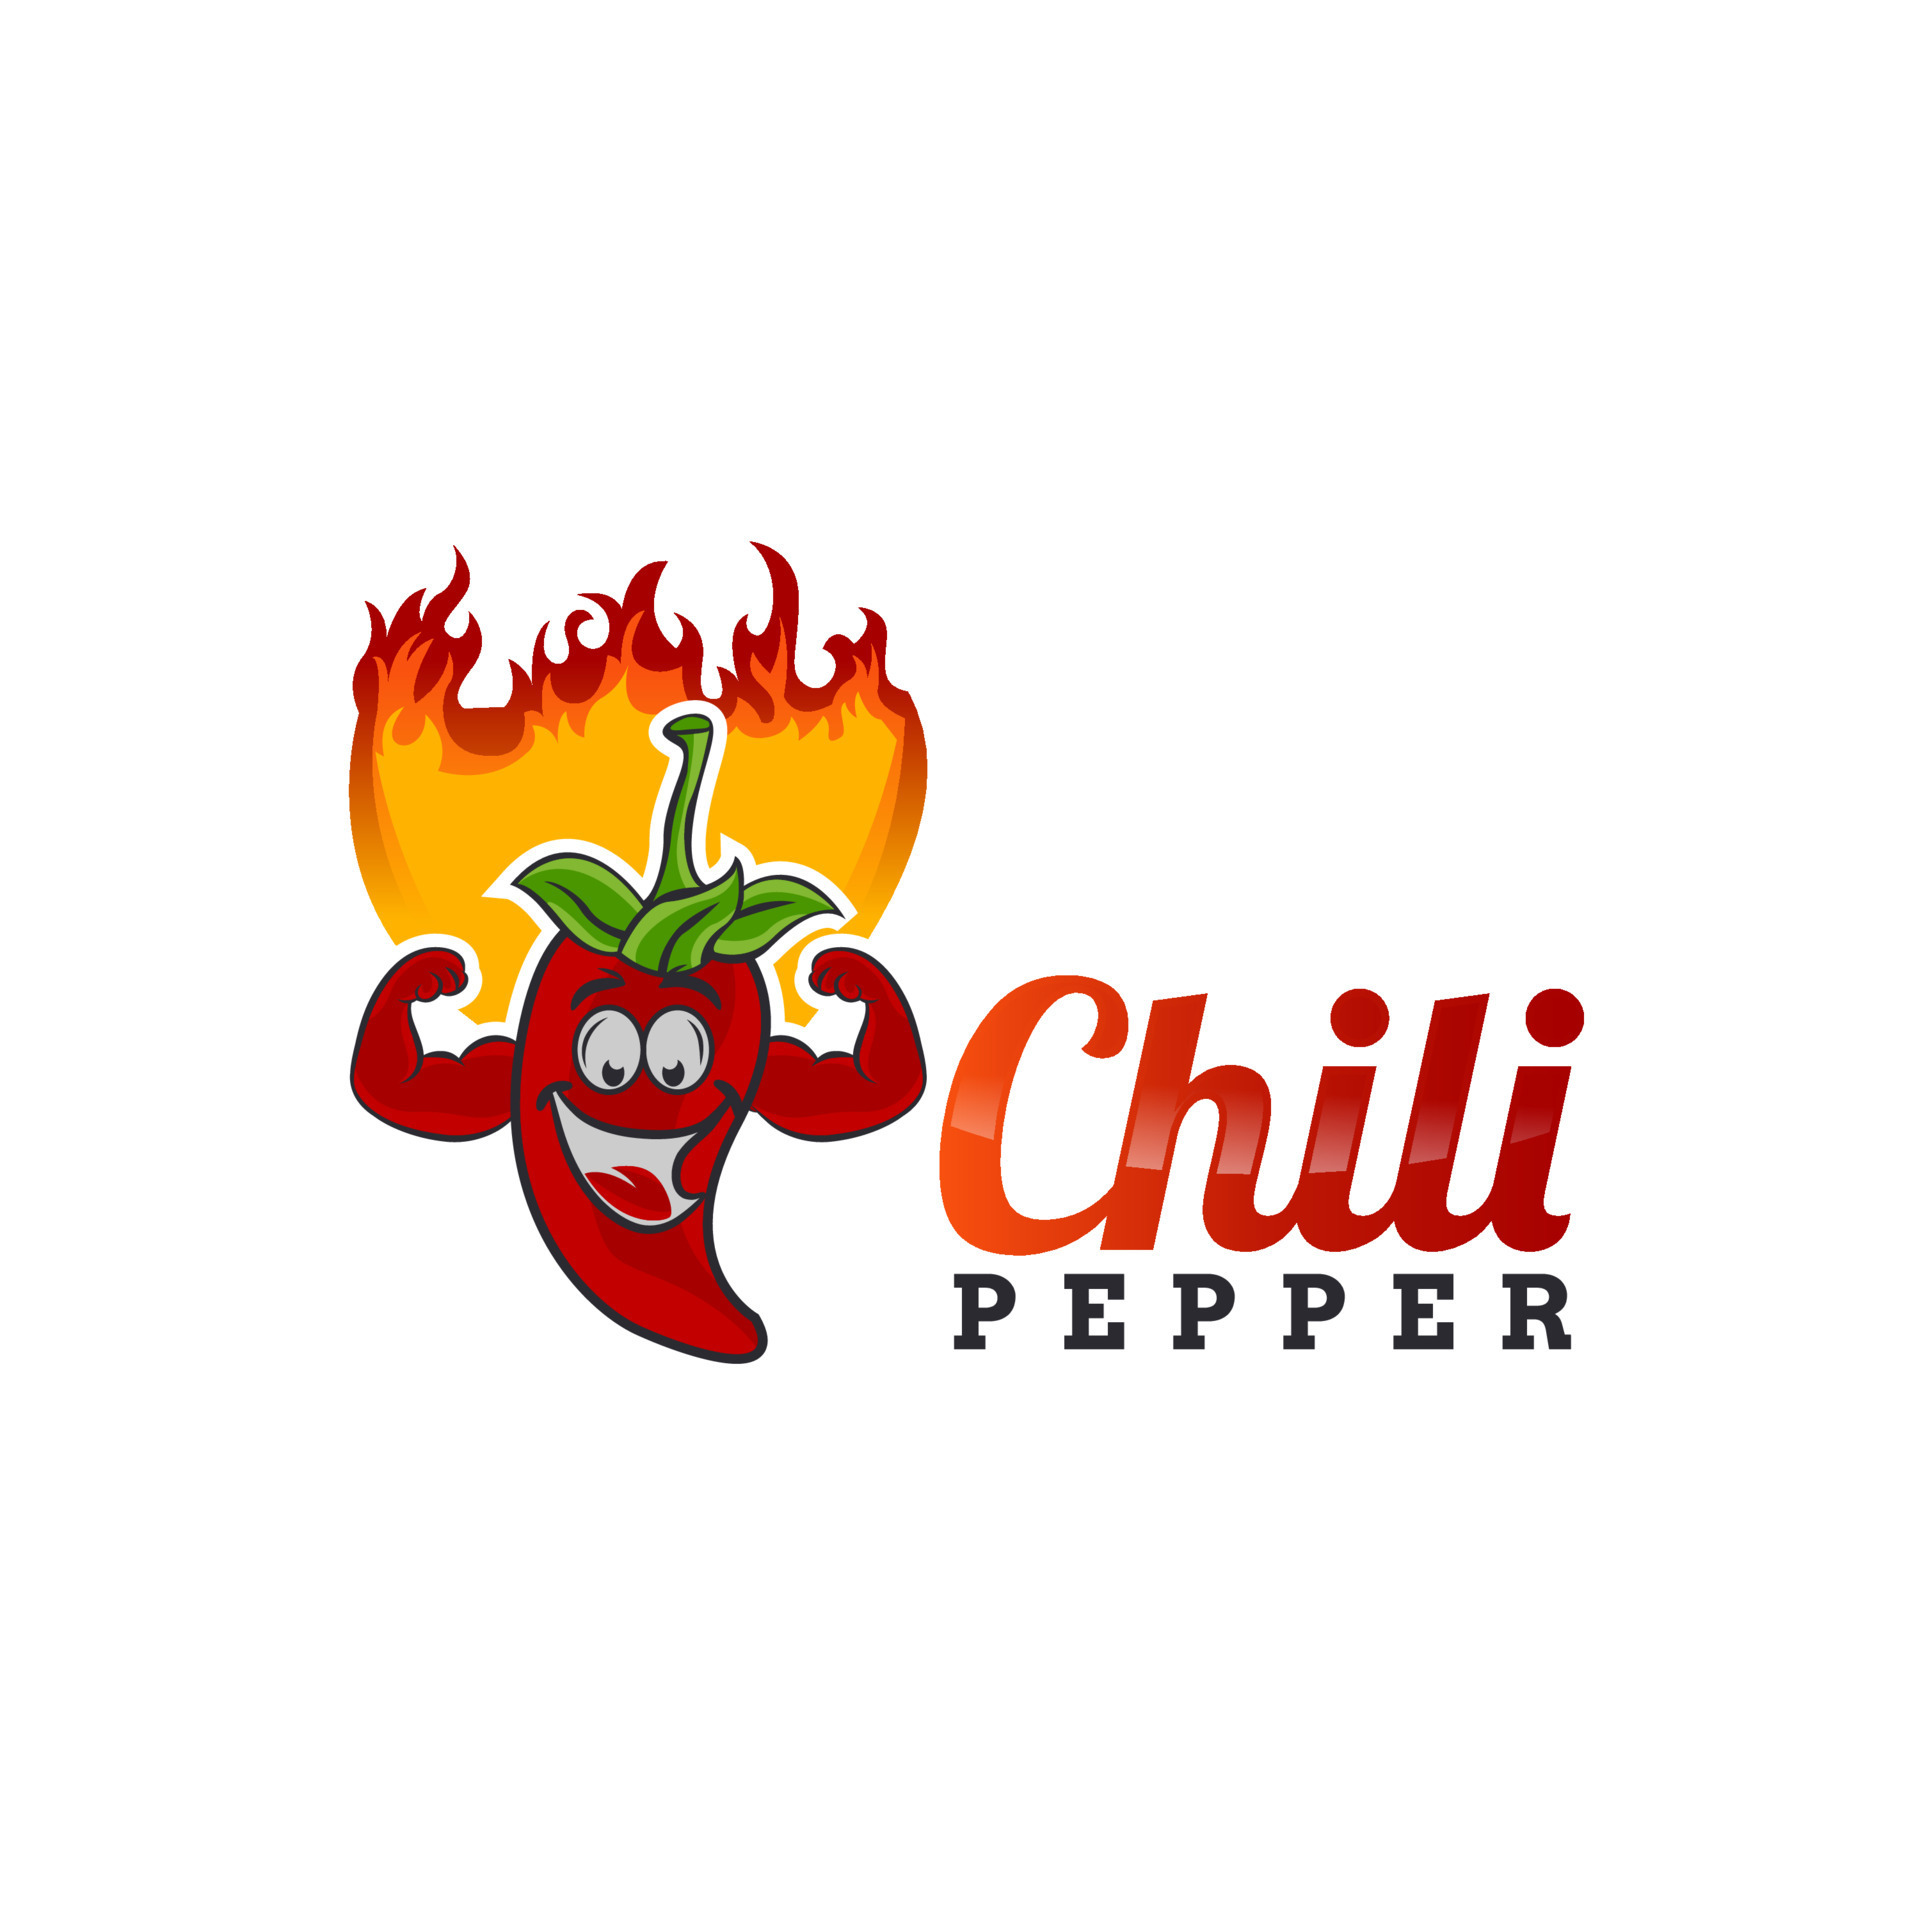 Red Hot Chili Pepper Character With Burning Flames Illustration of a ...